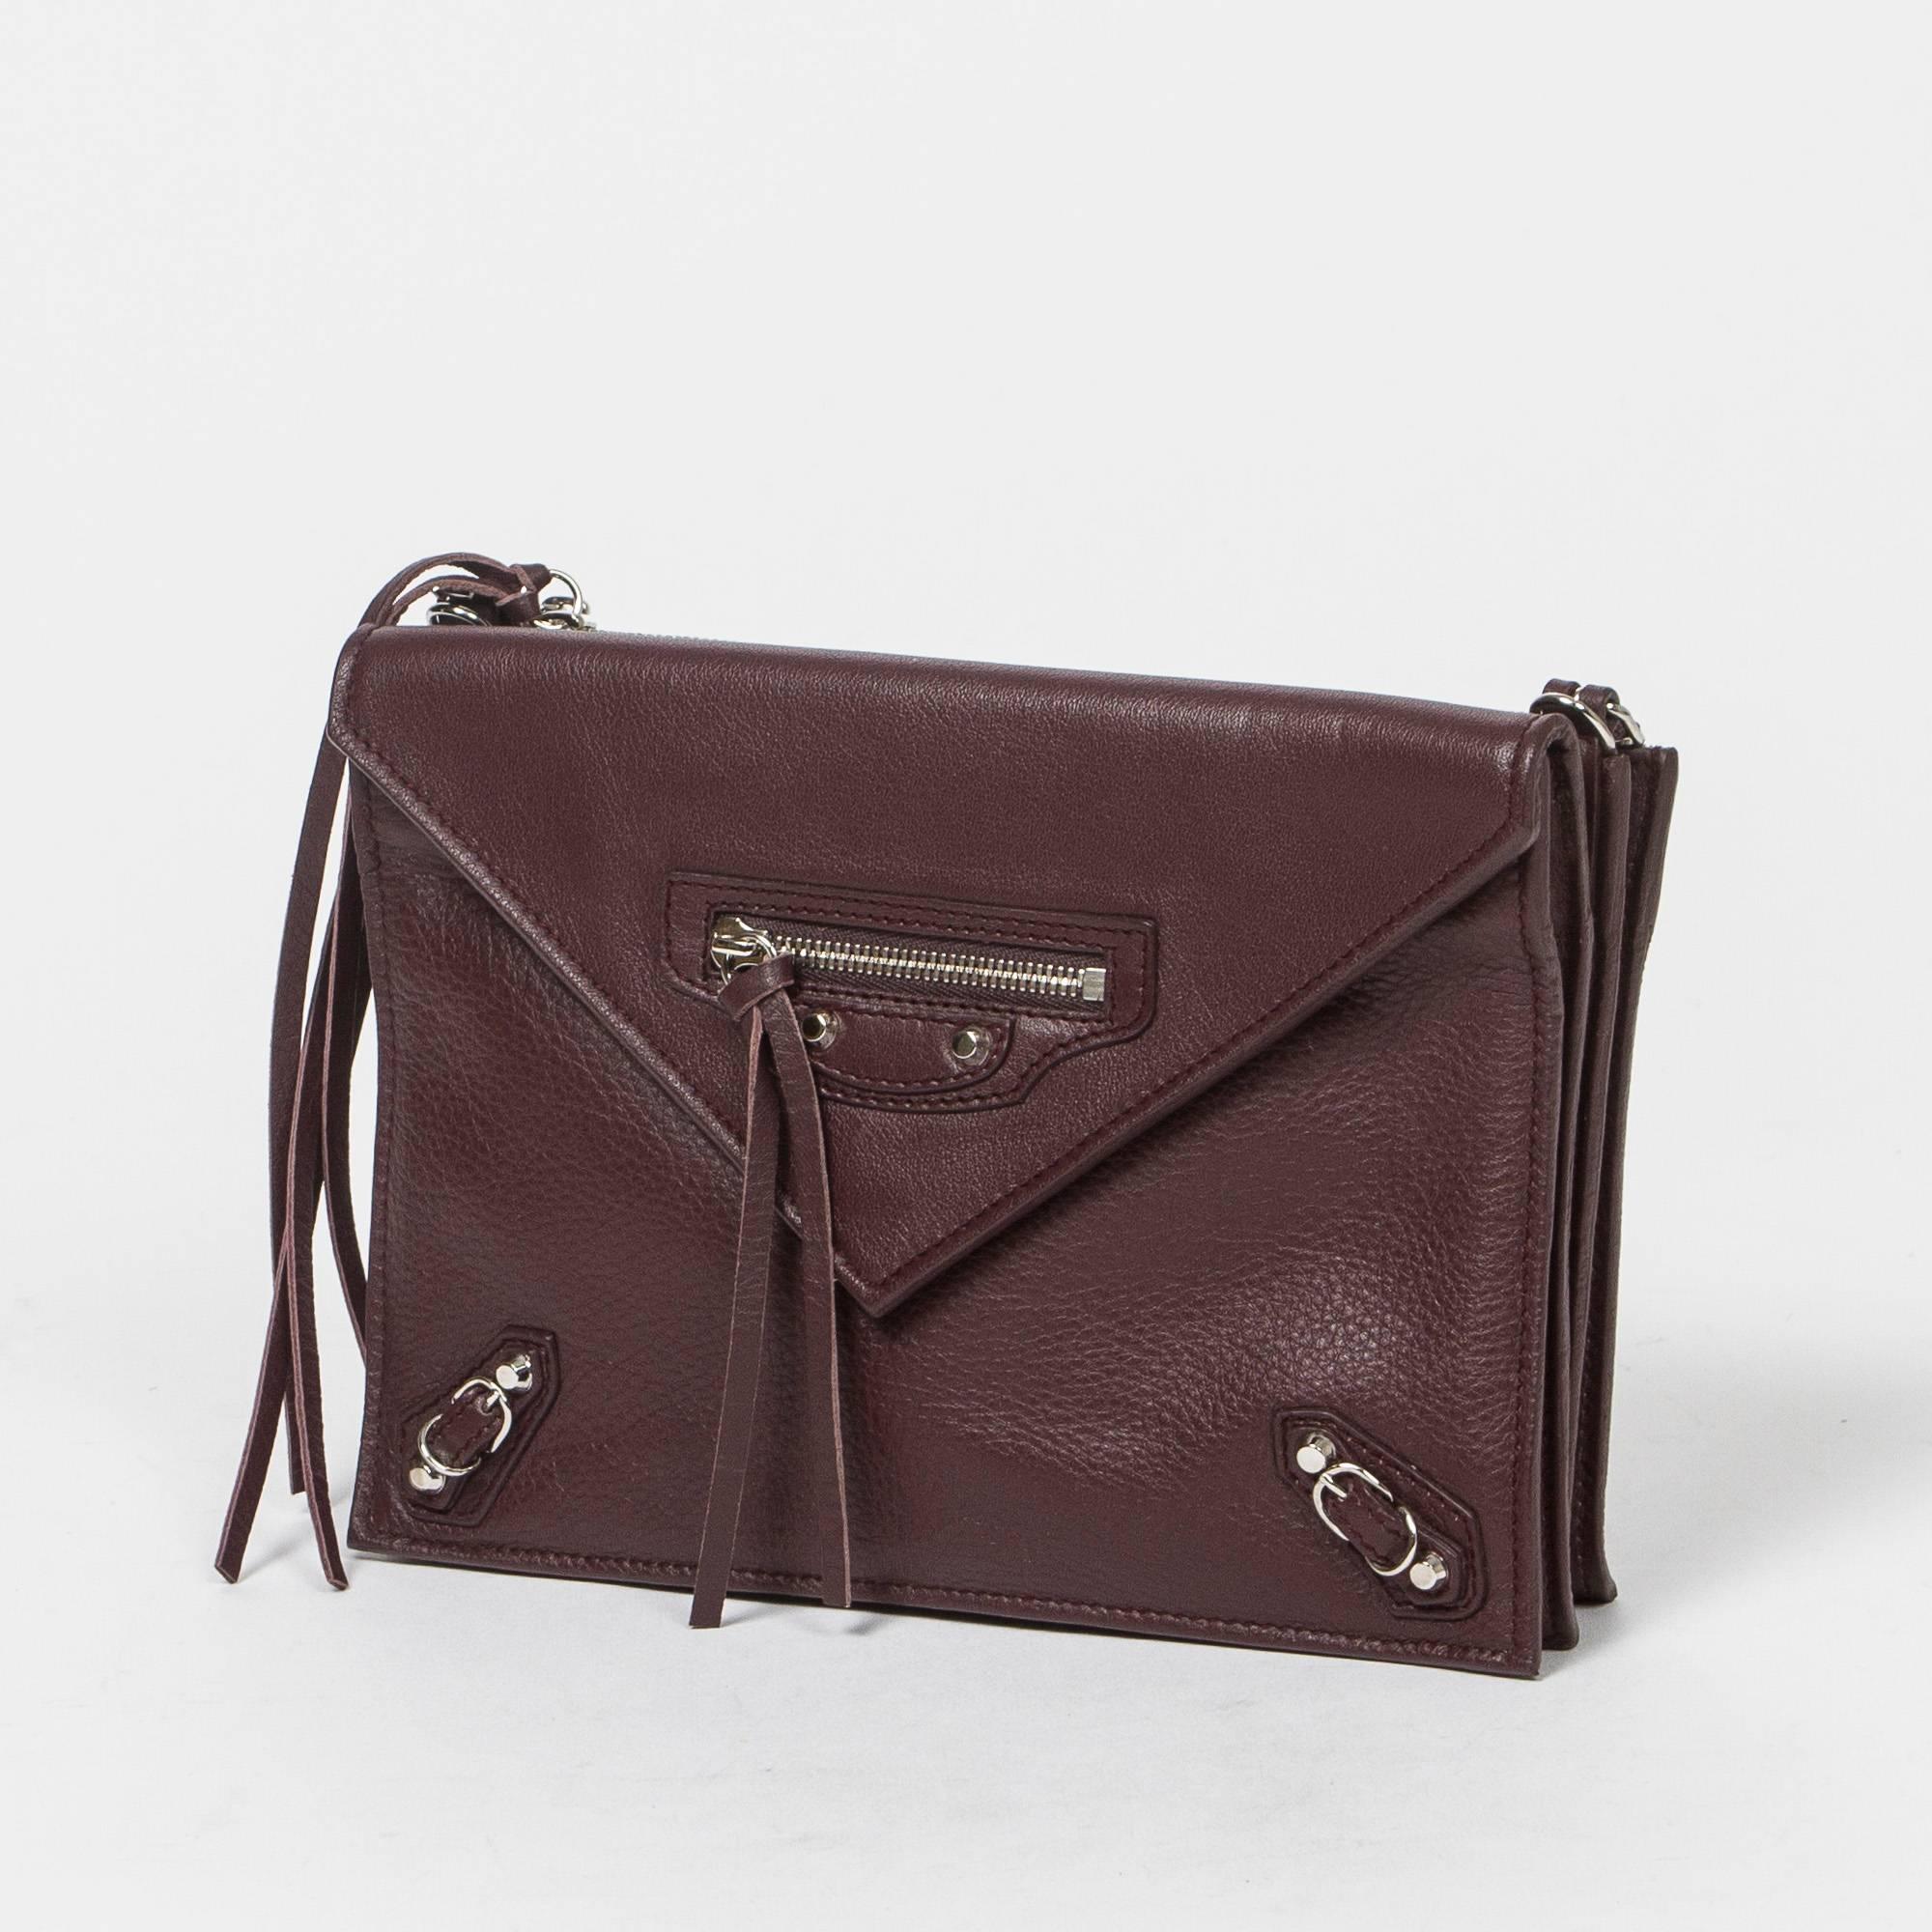 Paper Envelope Crossbody bag in brown leather with removable shoulder strap, silver tone hardware. Front pocket with magnetic closure. 4 compartment bag which 2 are zipped. One slip pocket in the last compartment. Production code 357321-6110-G-1669.